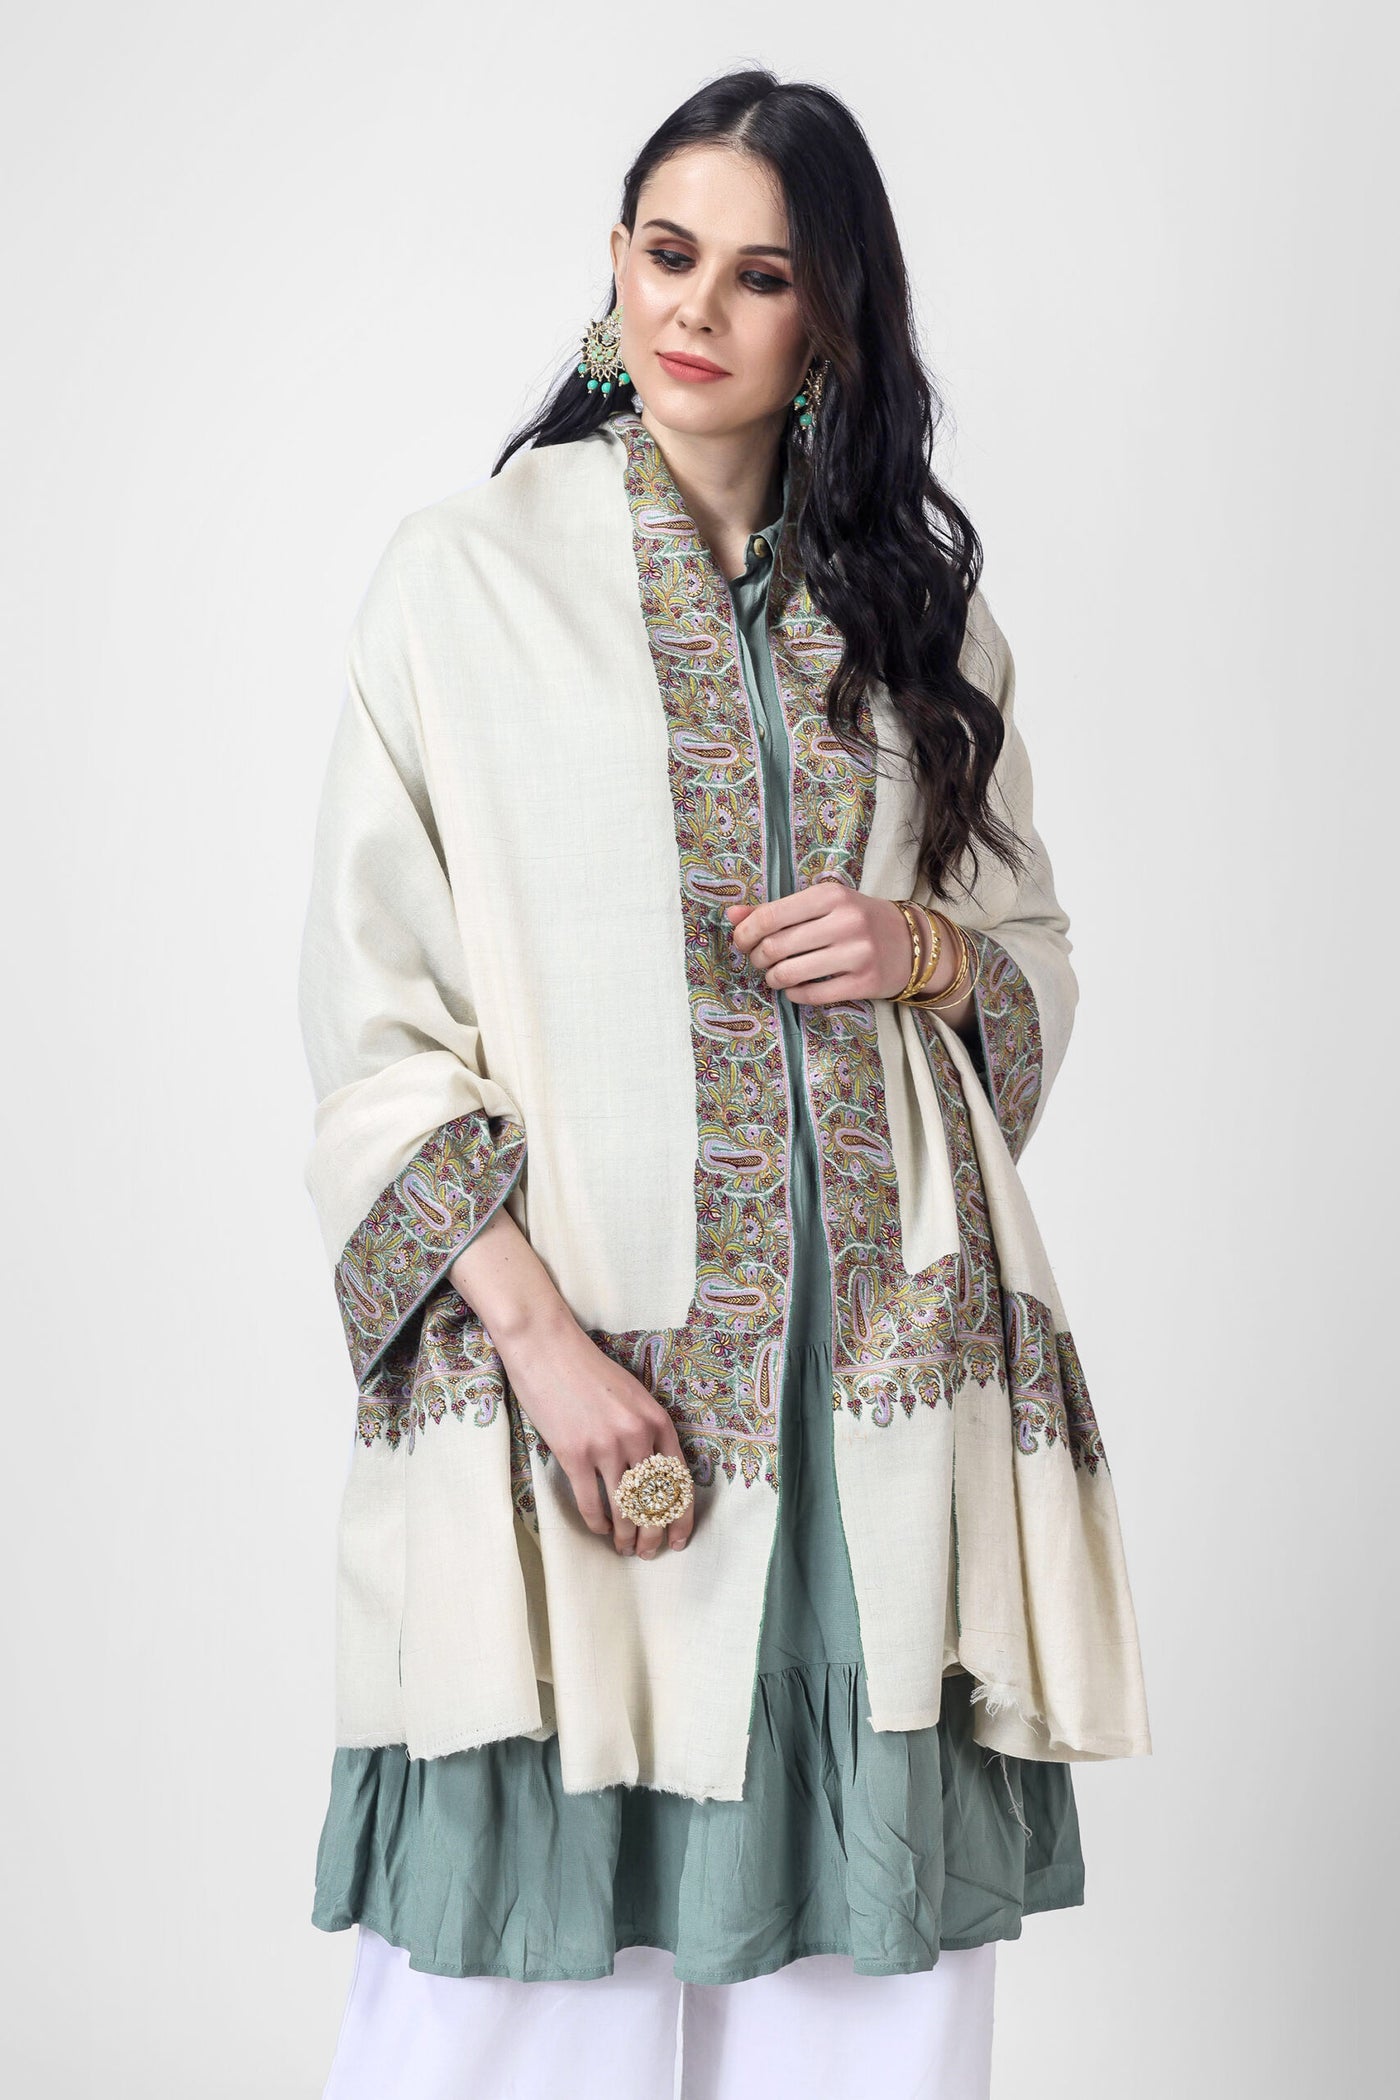 Drape yourself in luxury with a crafted Kashmiri pashmina shawl. This designer pashmina shawl will remain cozy and fashionable. It is created from the finest pashmina wool and features delicate almond shape stitching, making it the perfect addition to any event. On an off-white Pashmina shawl, 